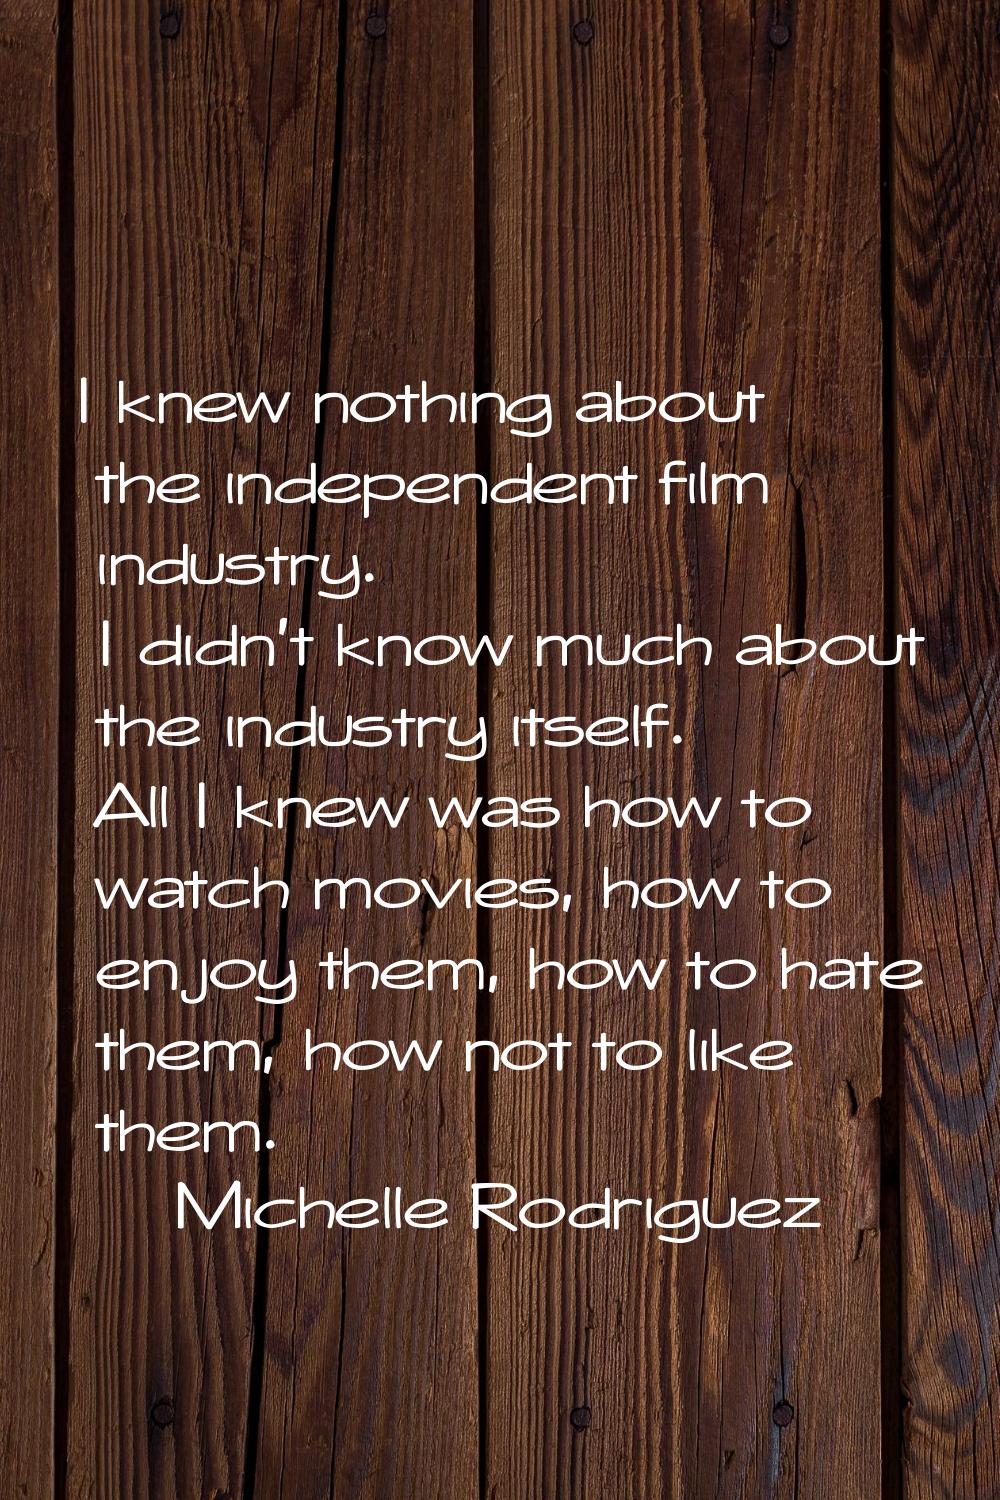 I knew nothing about the independent film industry. I didn't know much about the industry itself. A